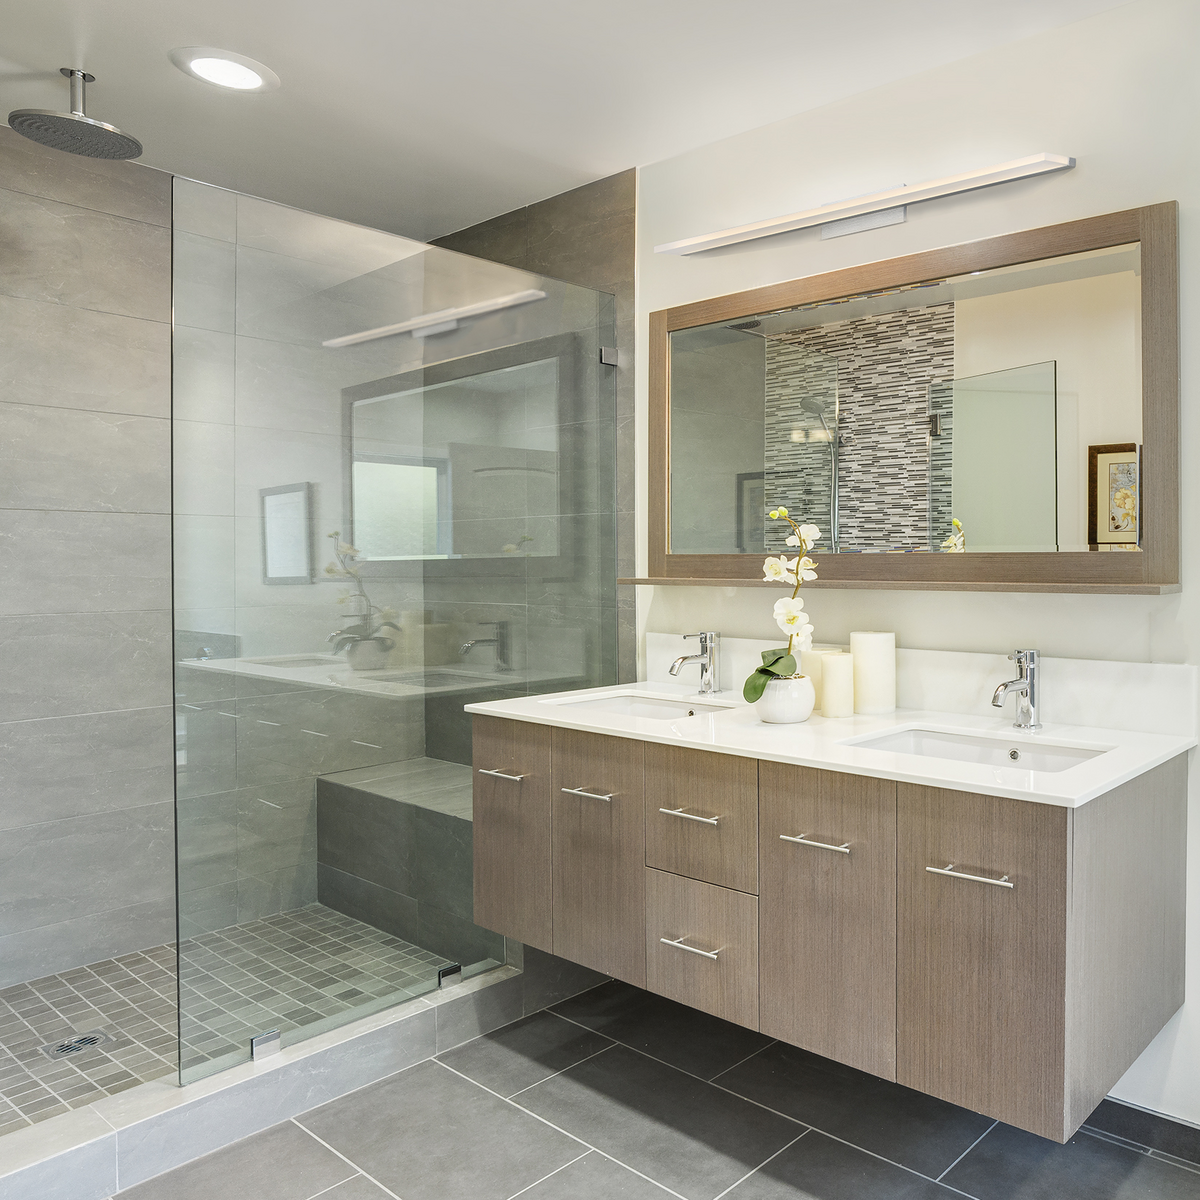 A vanity and shower in a modern bathroom.